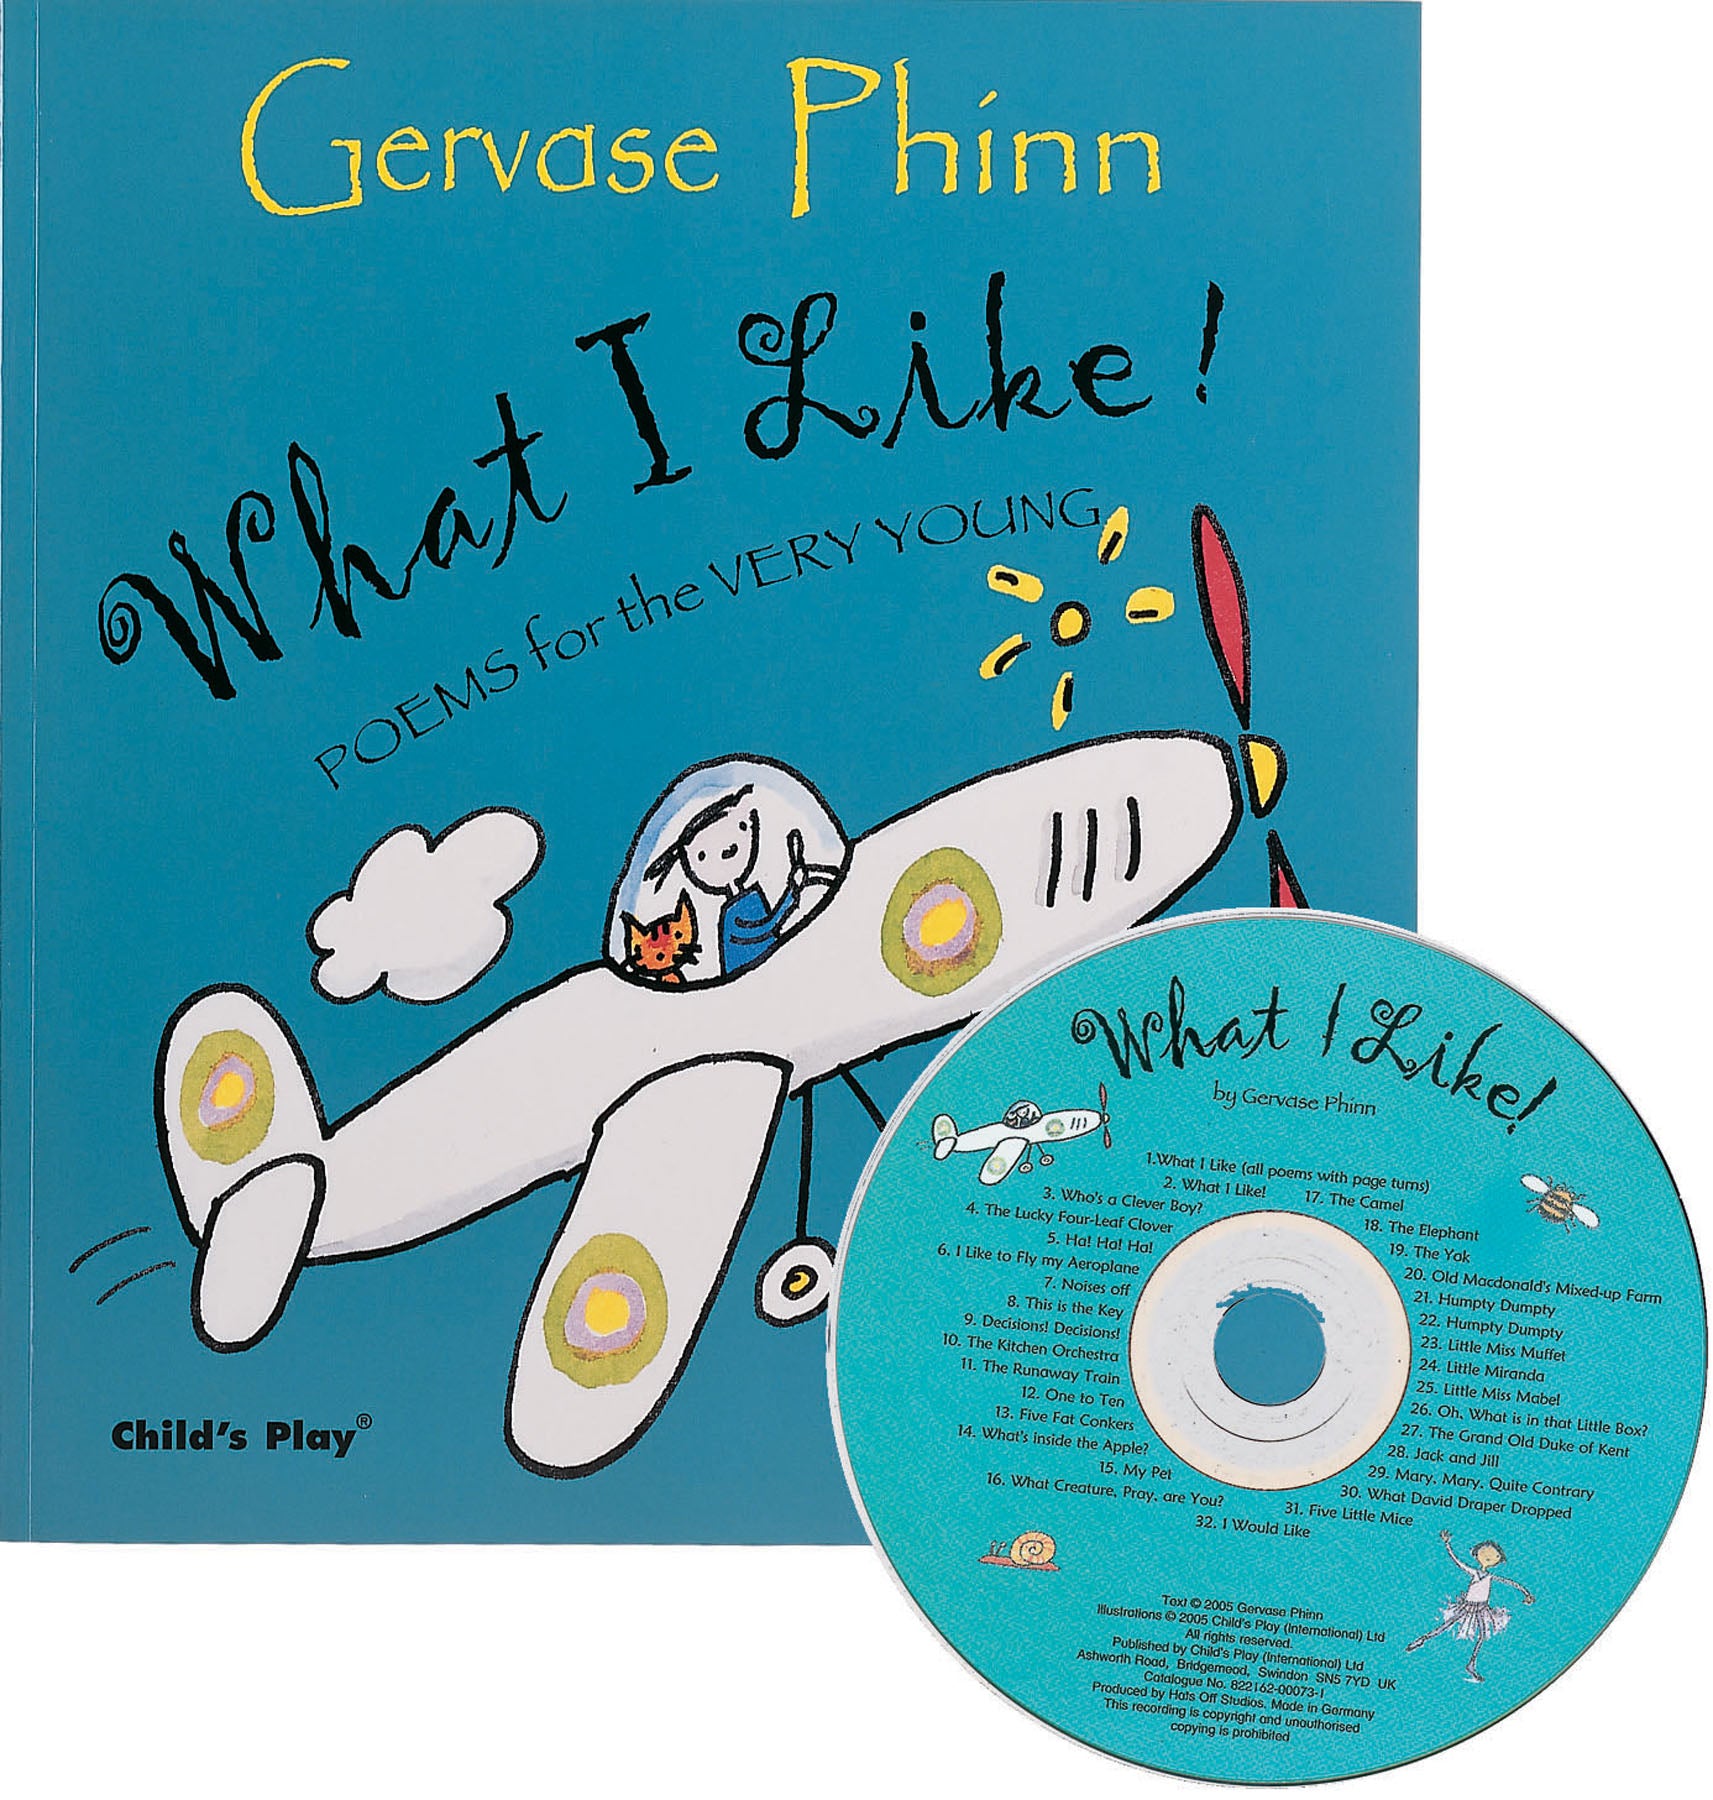 What I Like!: Poems for the Very Young